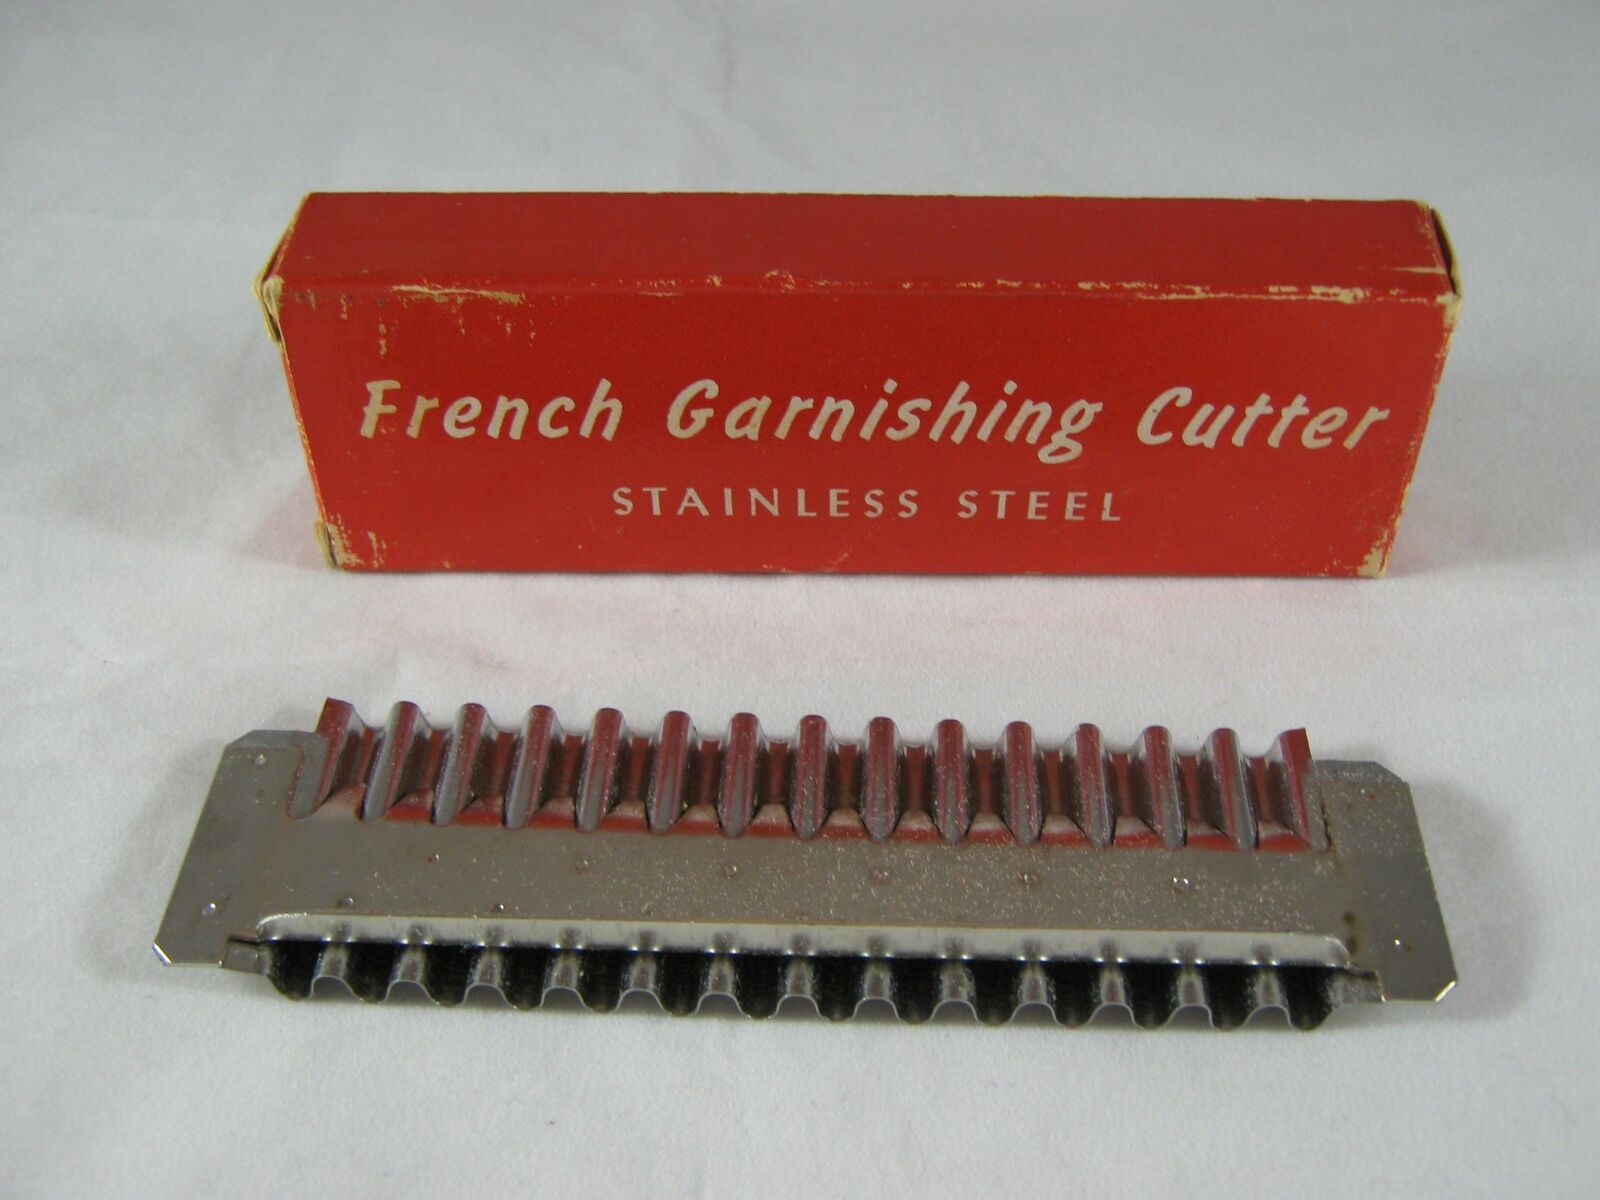 Vintage Kitchen Vegetable French Garnishing Stainless Cutter 1950's-60's MIB